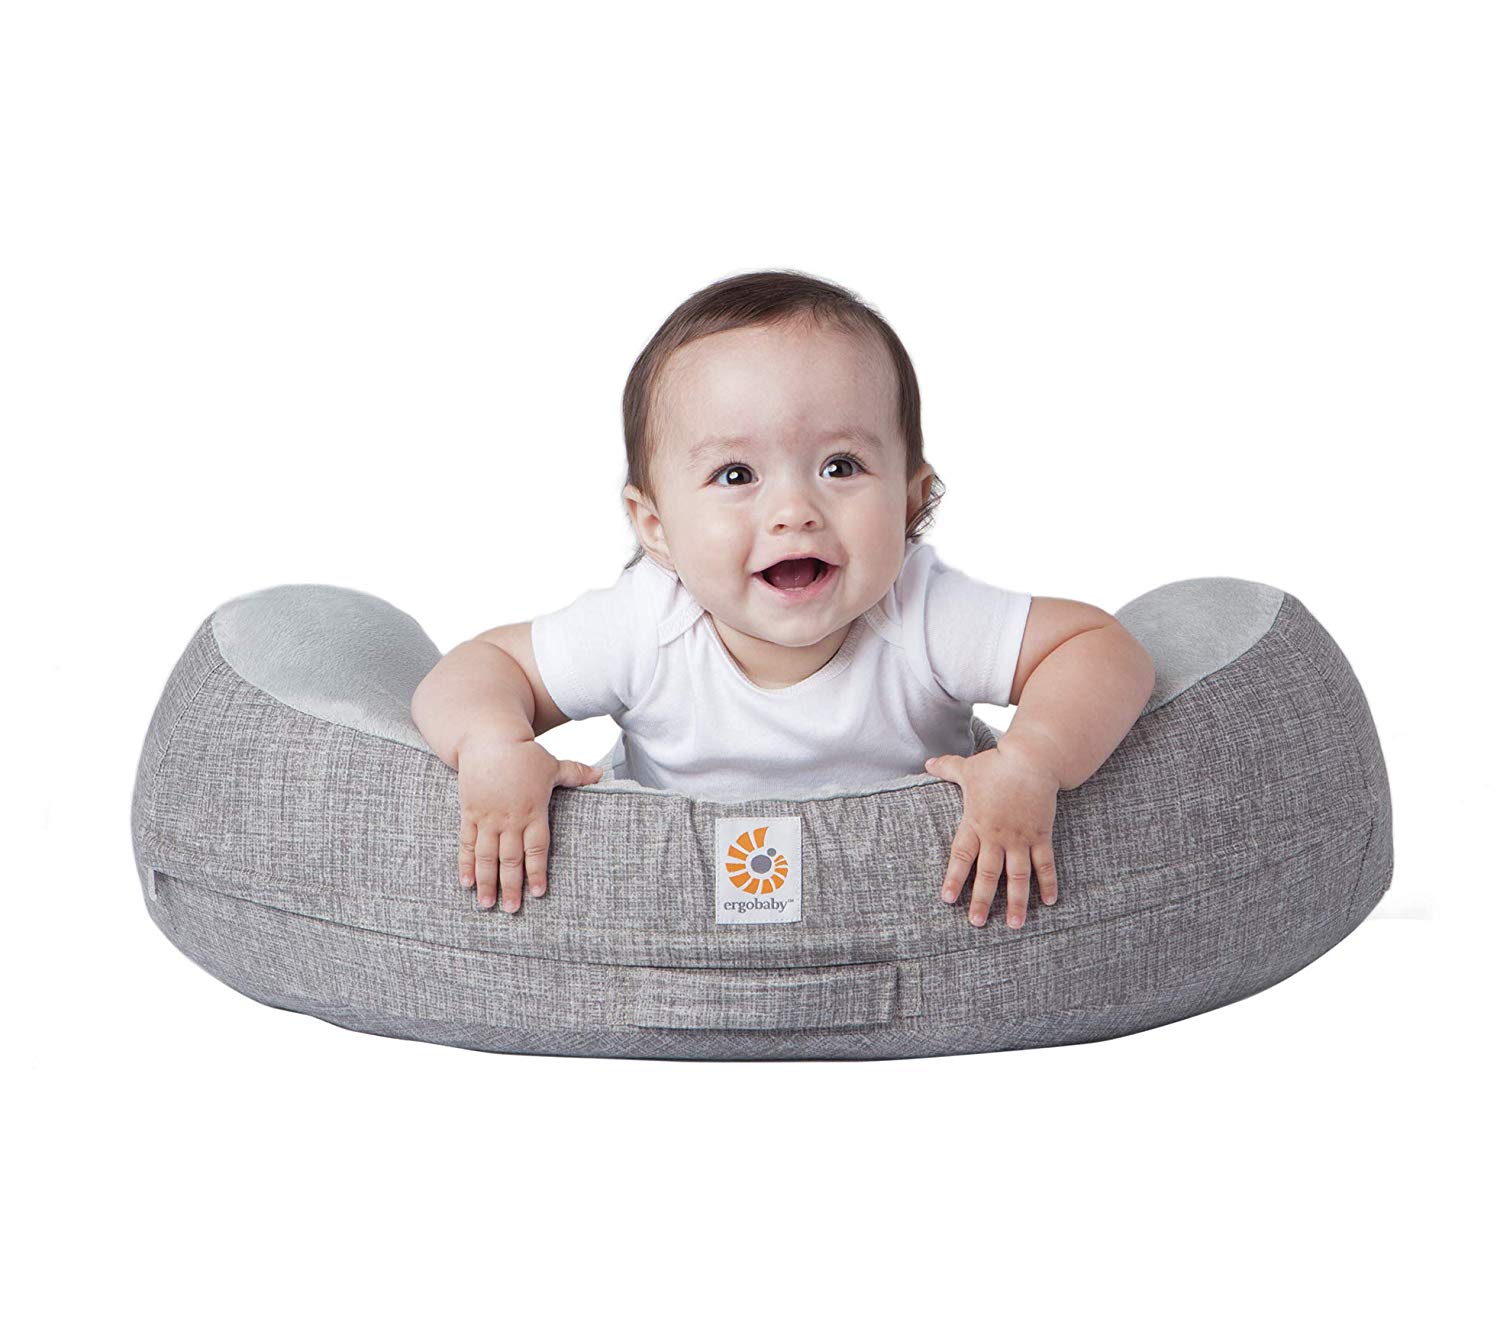 Ergobaby nursing pillow incl. Cover gray, natural curve Ergonomic filling made of dimensionally stable foam, NPAGRY2L 15 cm × 60 cm × 36 cm, gray